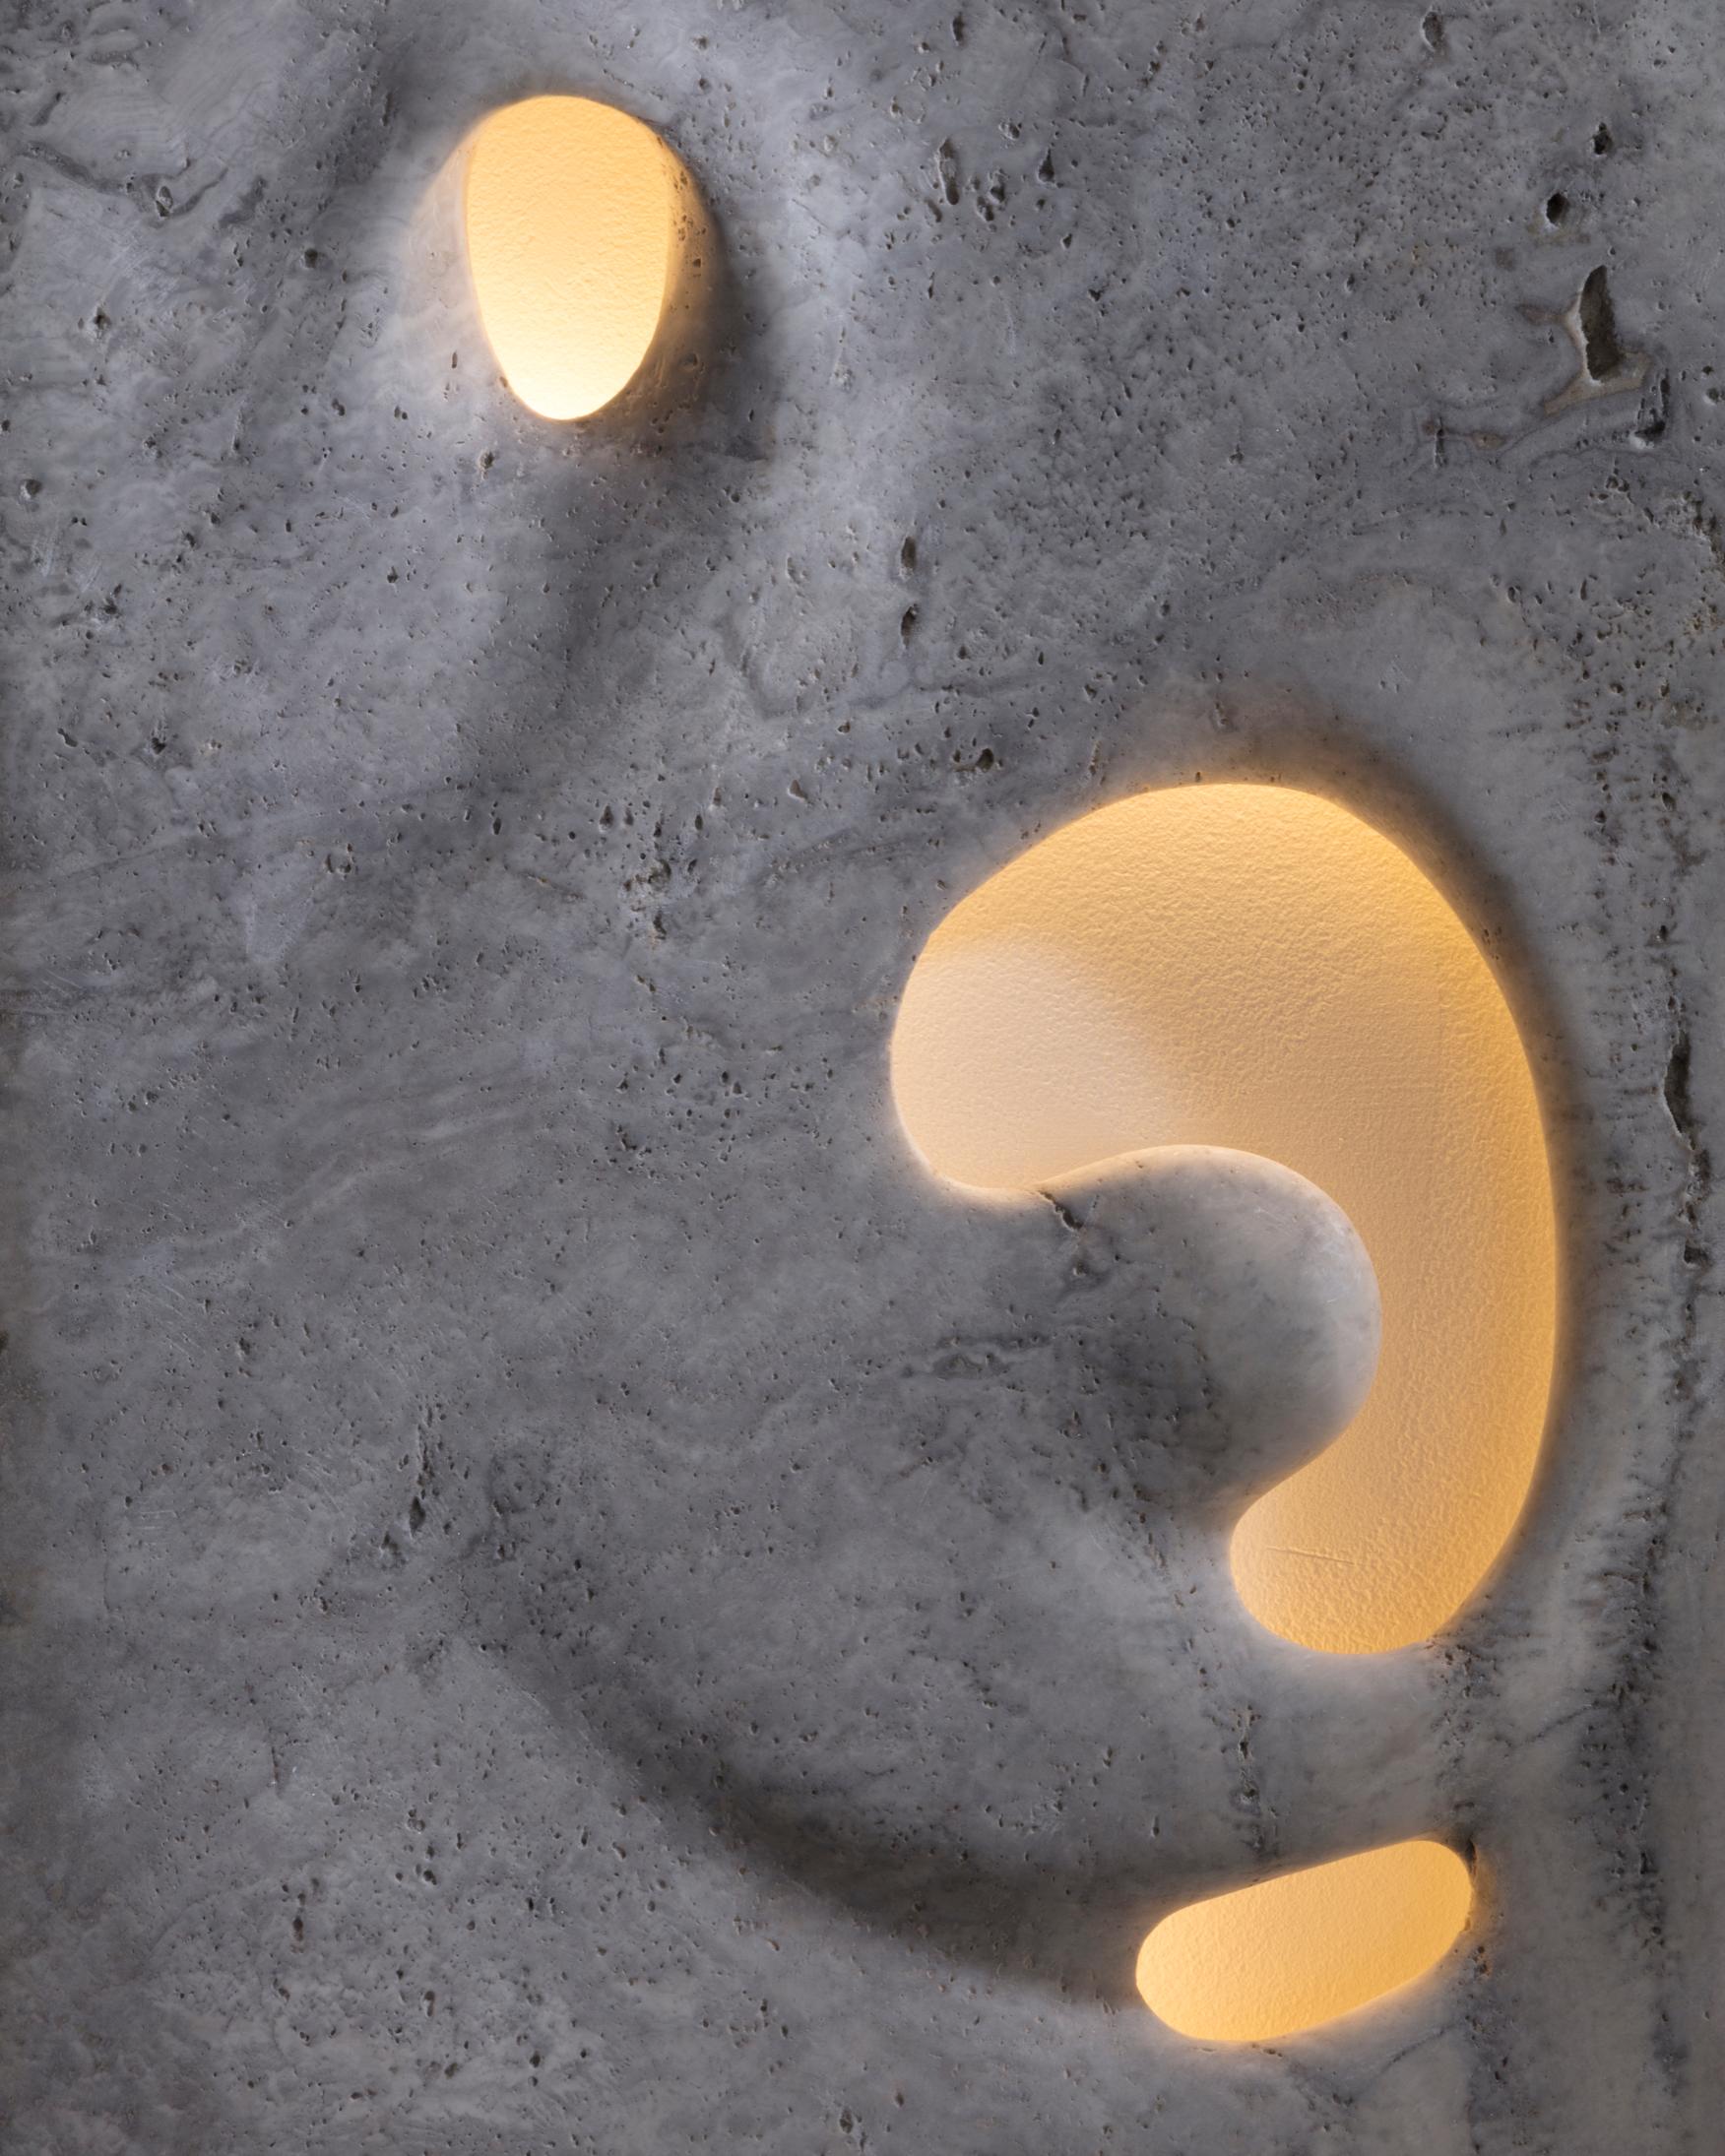 American Wall Mounted Illuminated Sculpture in White Travertine by Rogan Gregory, 2016